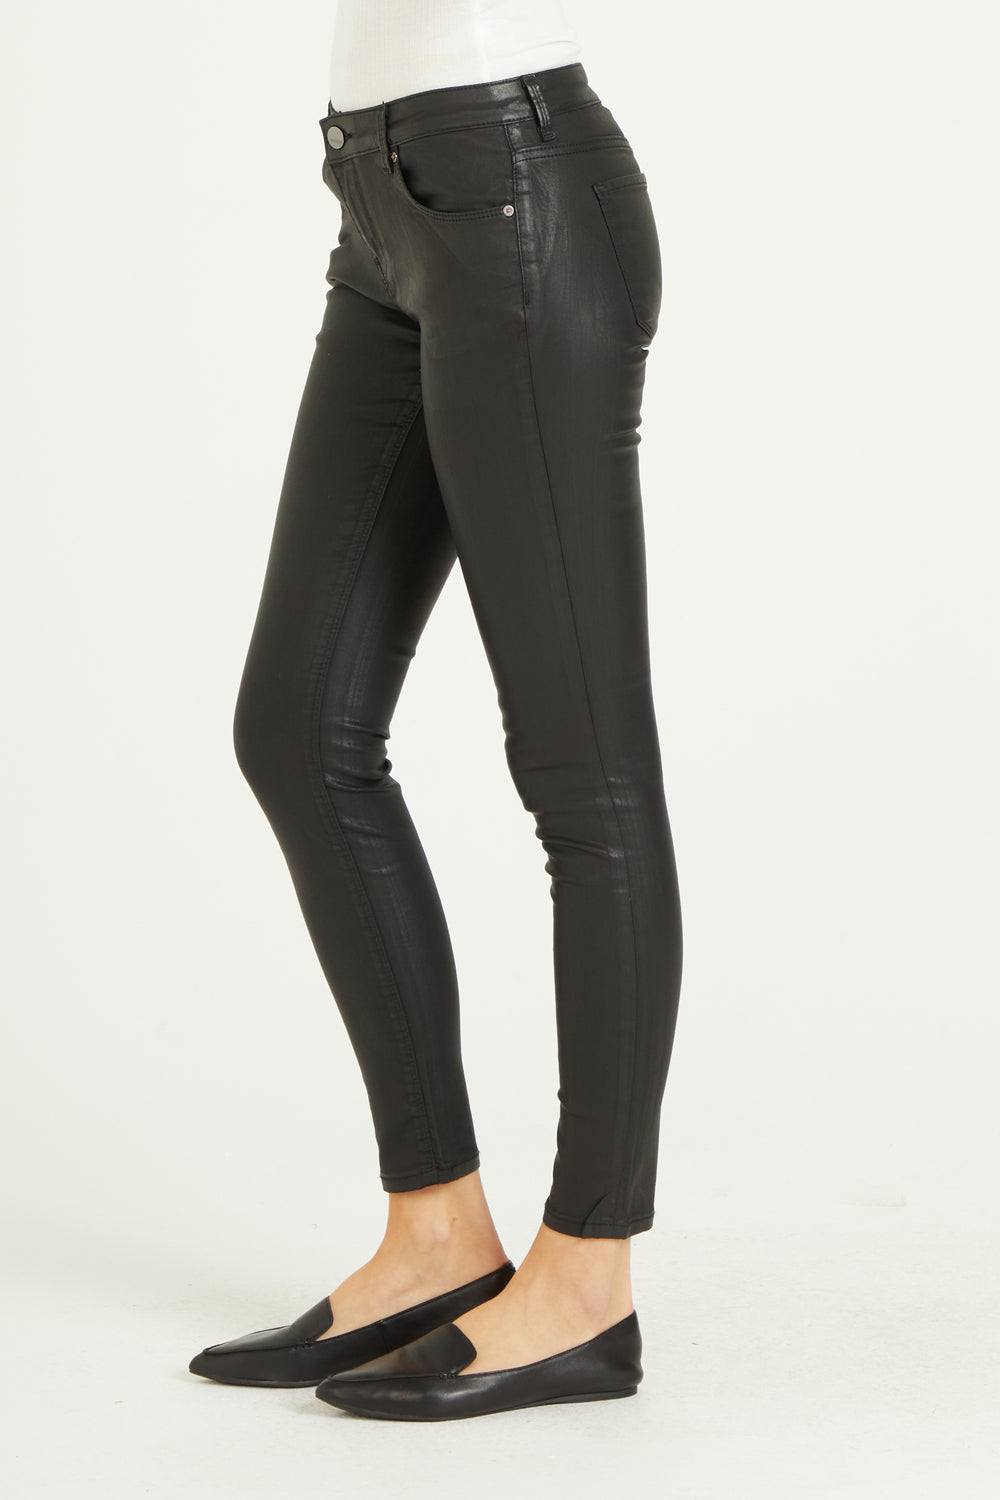 image of a female model wearing a PIXIE HIGH RISE ANKLE SKINNY JEANS BLACK COATED JEANS